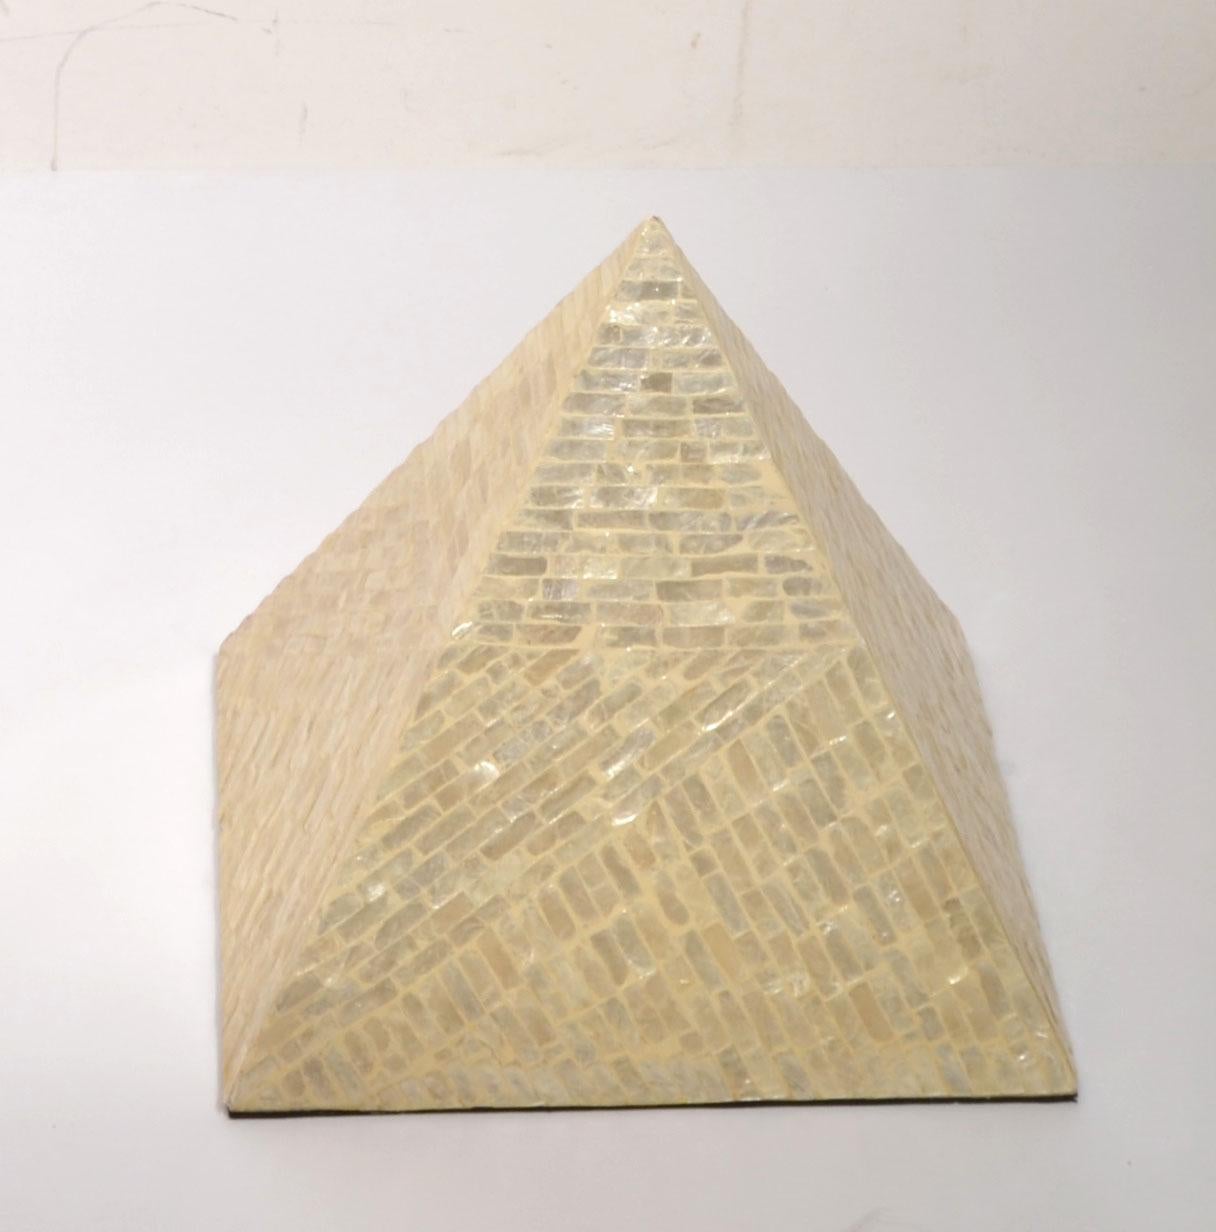 1980s Italian Pyramid Mother Of Pearl Wood Sculpture Decorative Object Fine Art  For Sale